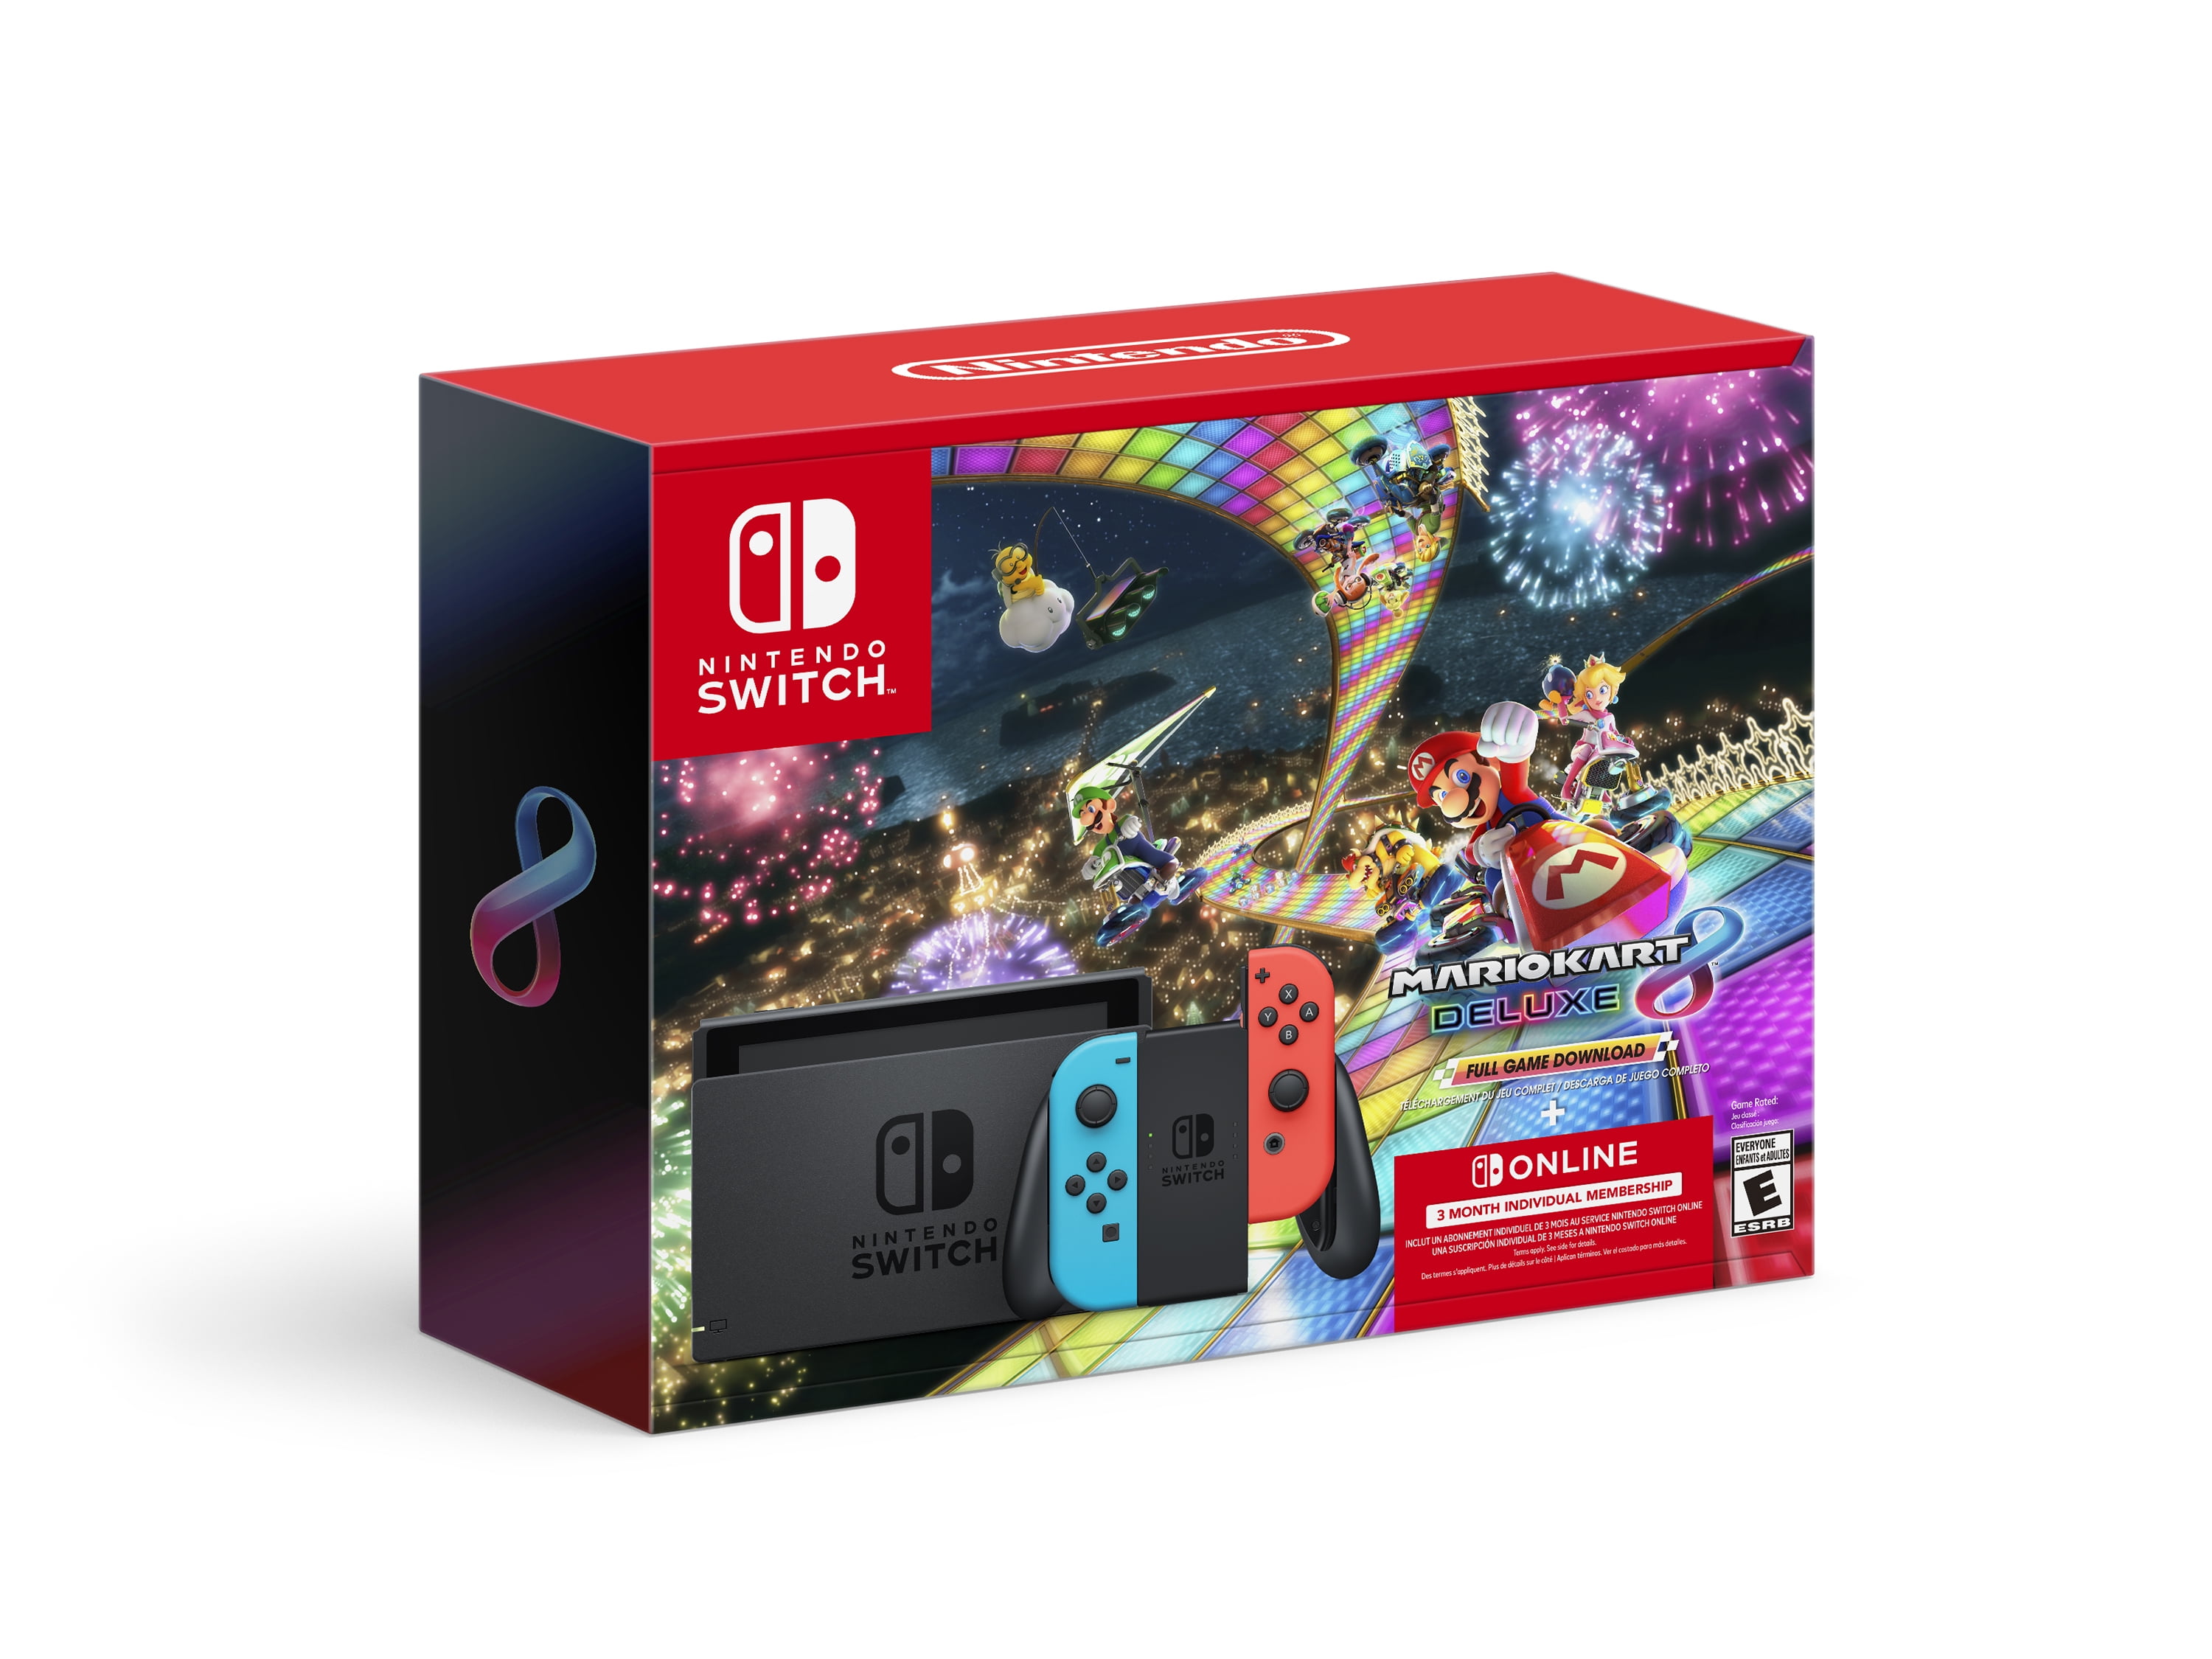 nyt år Menagerry Perennial Nintendo Switch™ w/ Neon Blue & Neon Red Joy-Con™ + Mario Kart™ 8 Deluxe  (Full Game Download) + 3 Month Nintendo Switch Online Individual Membership  - Walmart.com